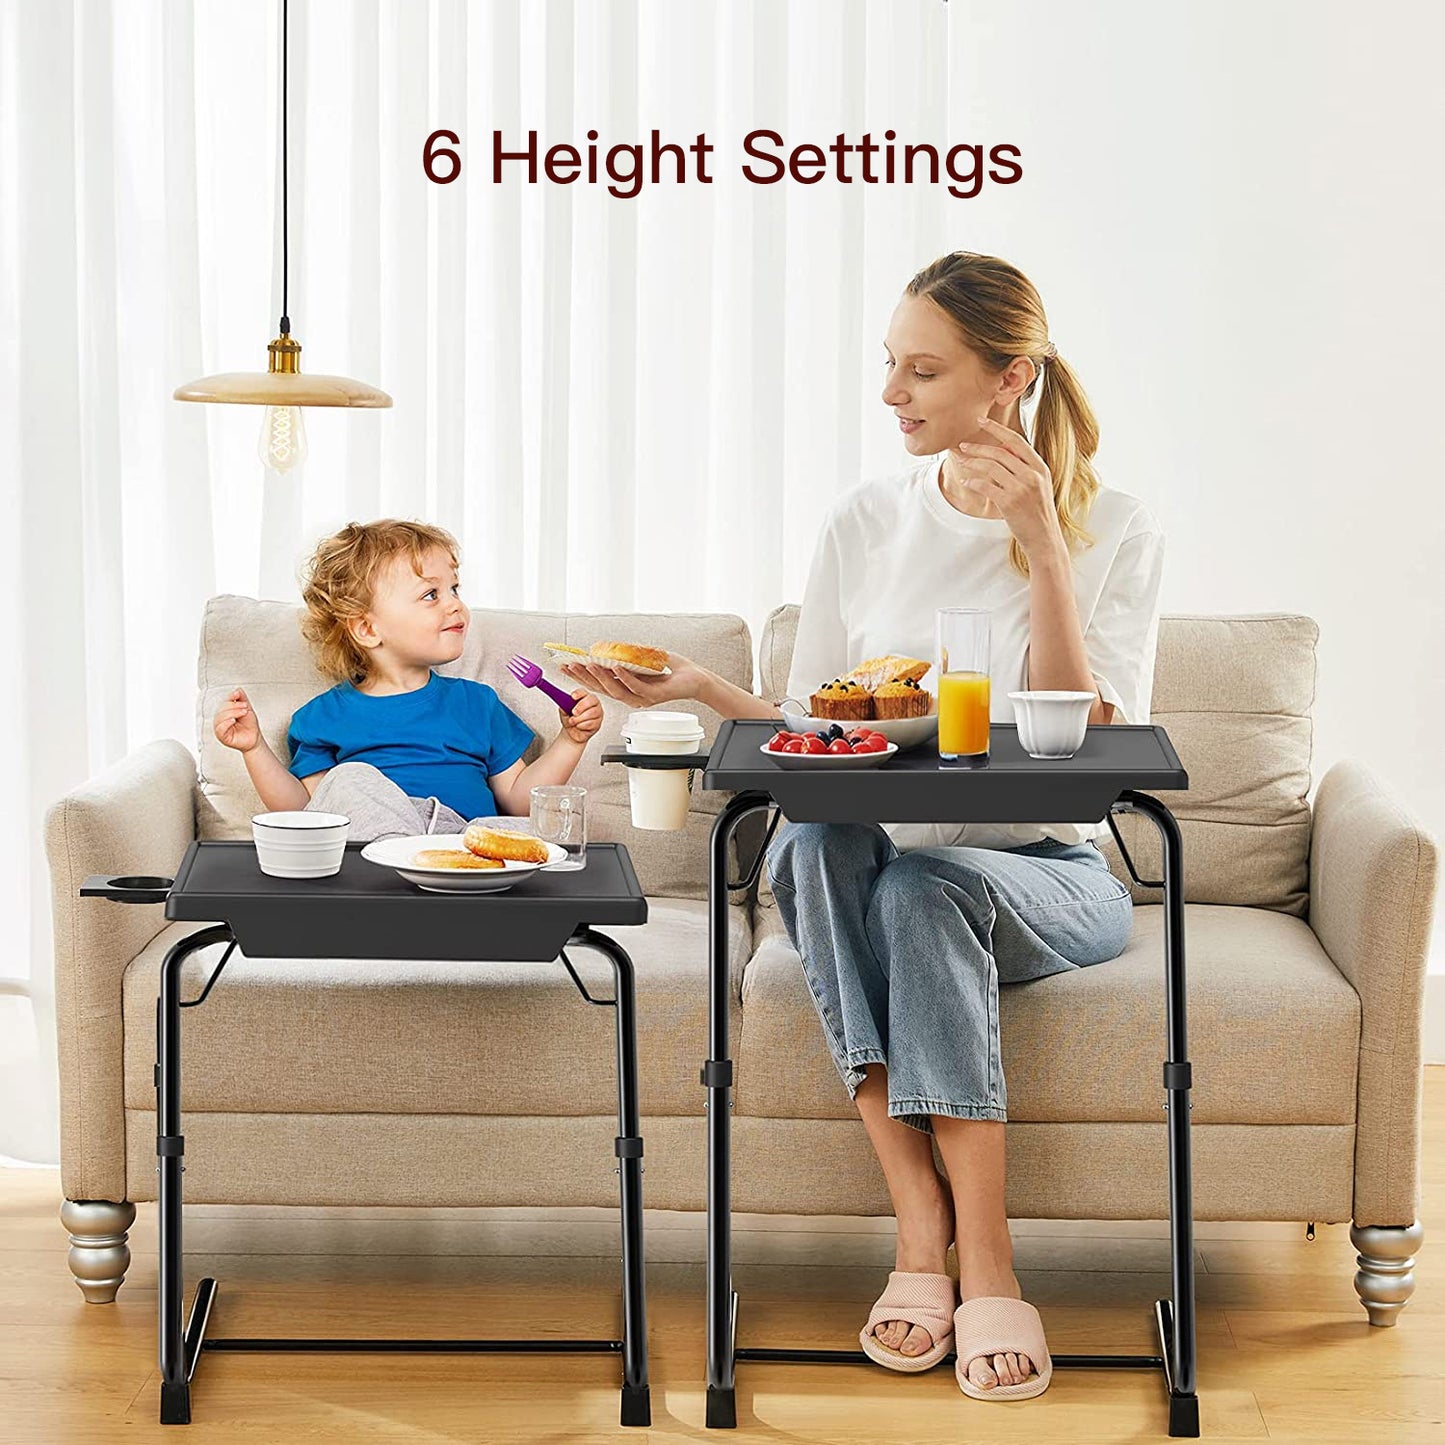 Adjustable TV Tray With 6 Heights & 3 Tilts (Black)